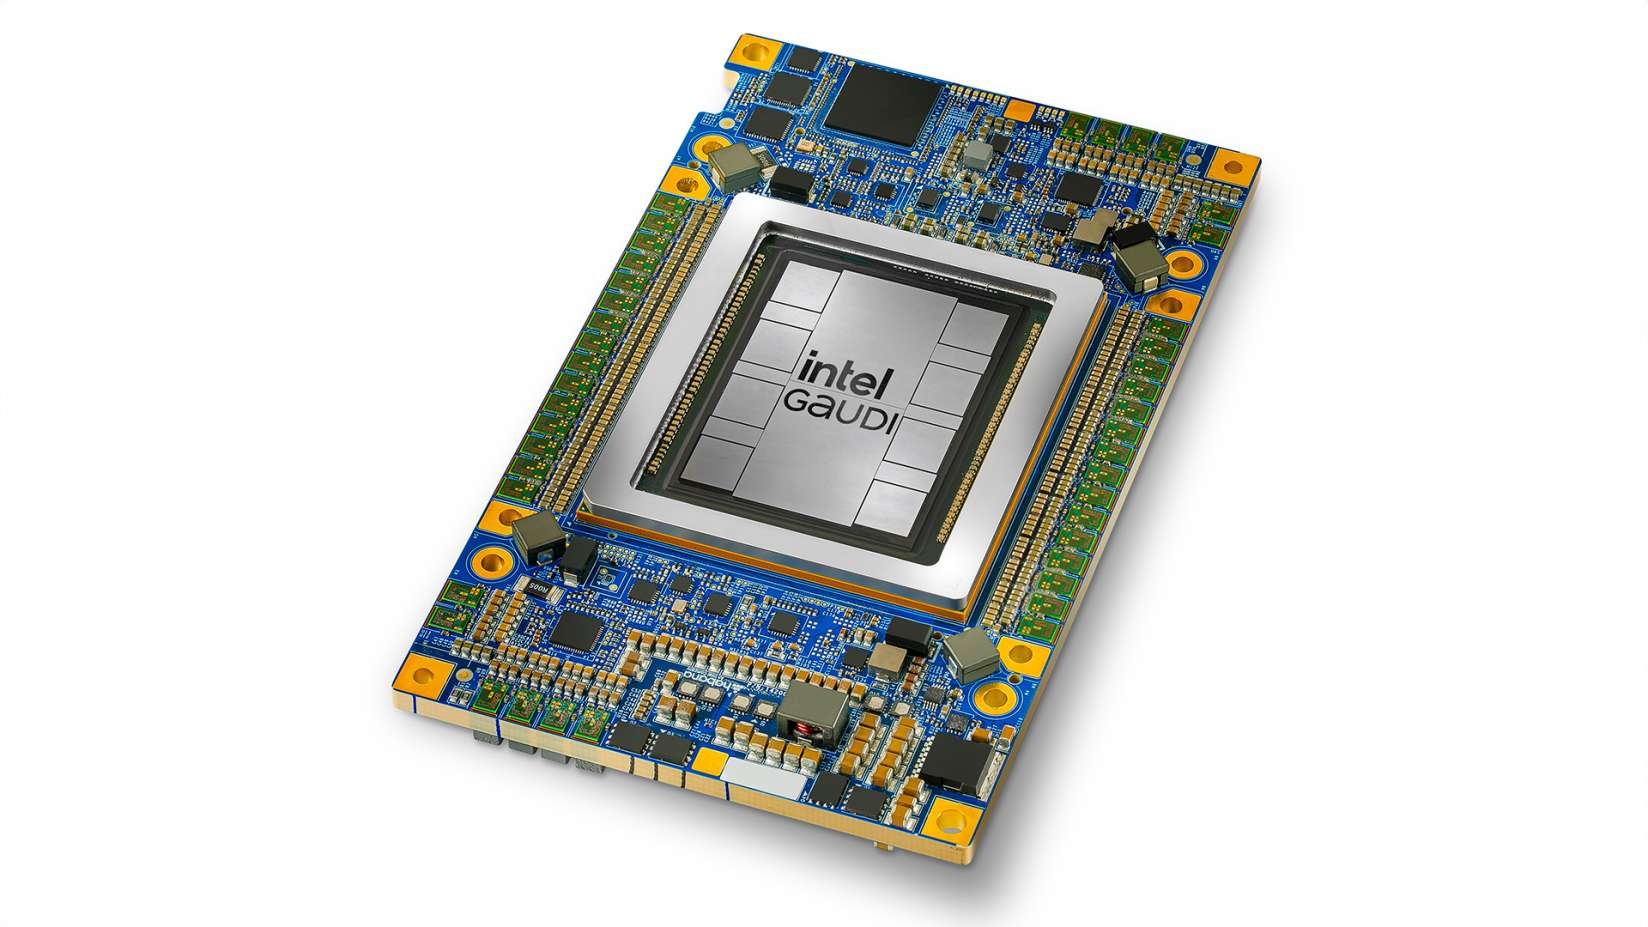 Intel challenges Nvidia with new Gaudi 3 AI chip as AMD expands processor lineup - SiliconANGLE